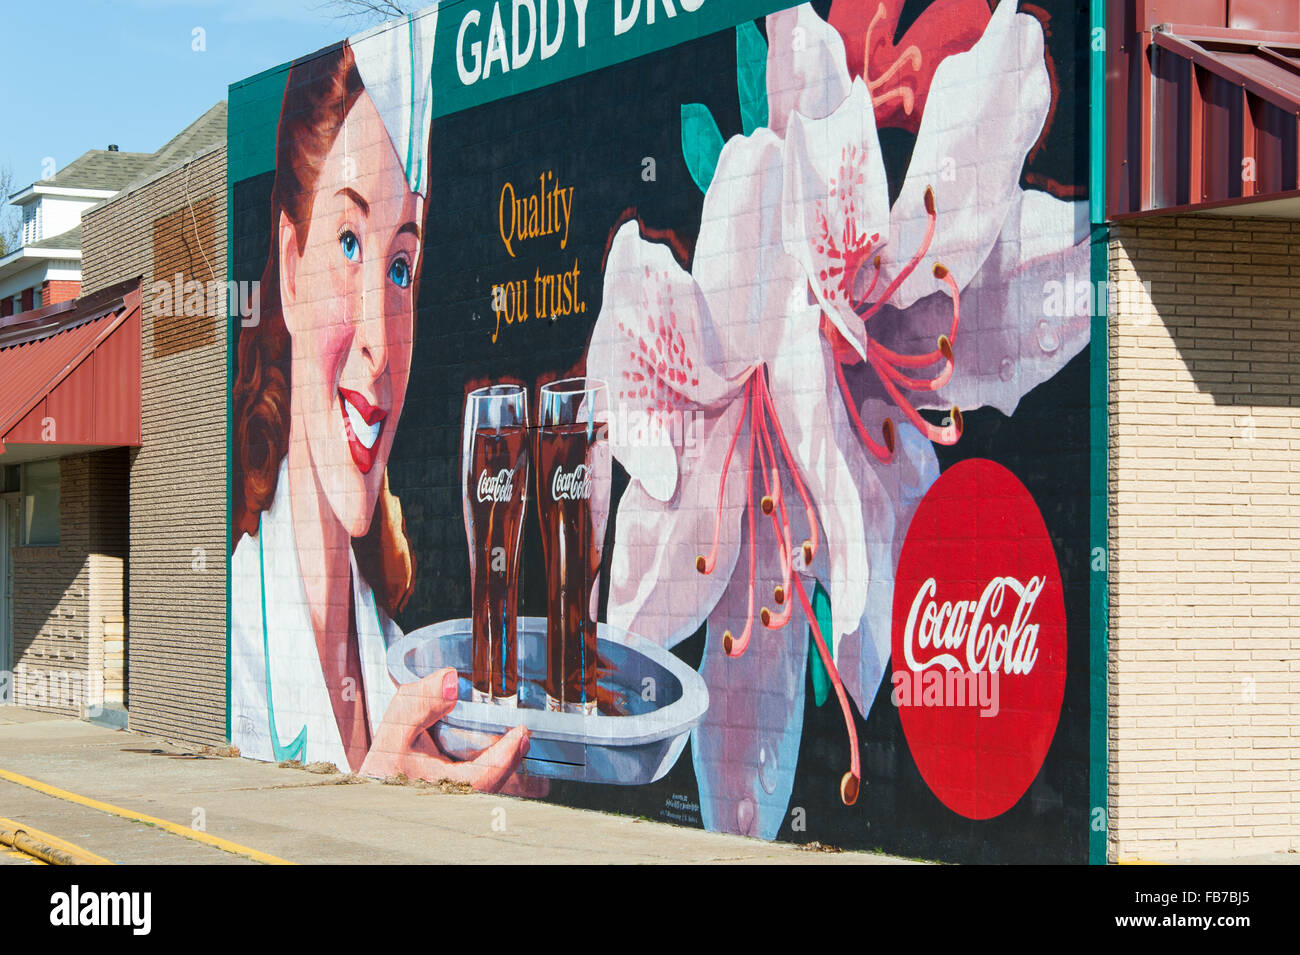 Coca-Cola wall art mural on the side of Gaddy Drug pharmacy (established 1949) building in Muskogee, Oklahoma, USA. Stock Photo